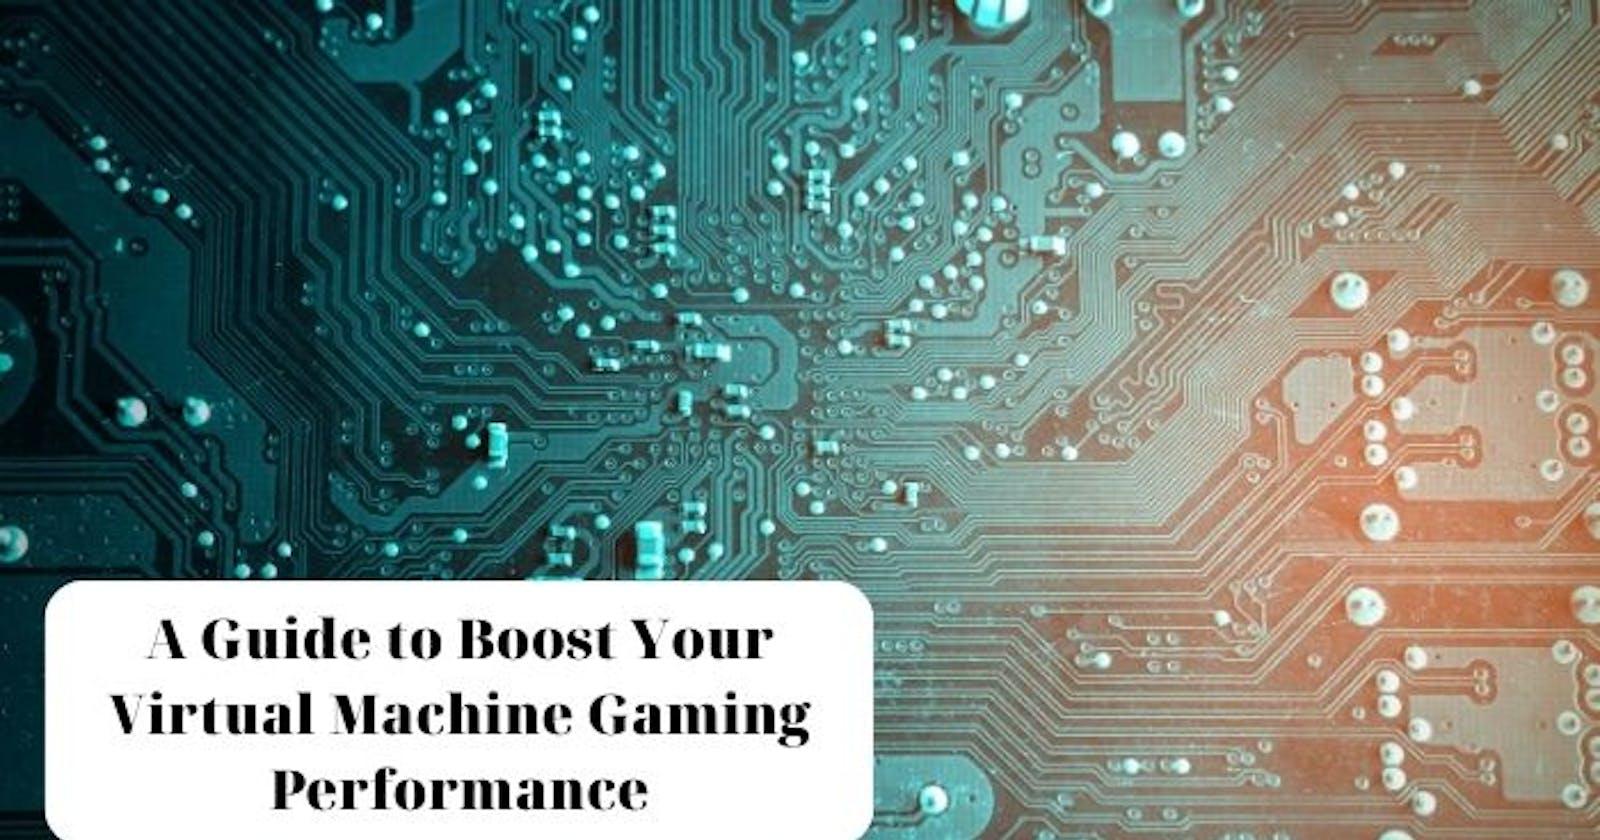 A Guide to Boost Your Virtual Machine Gaming Performance